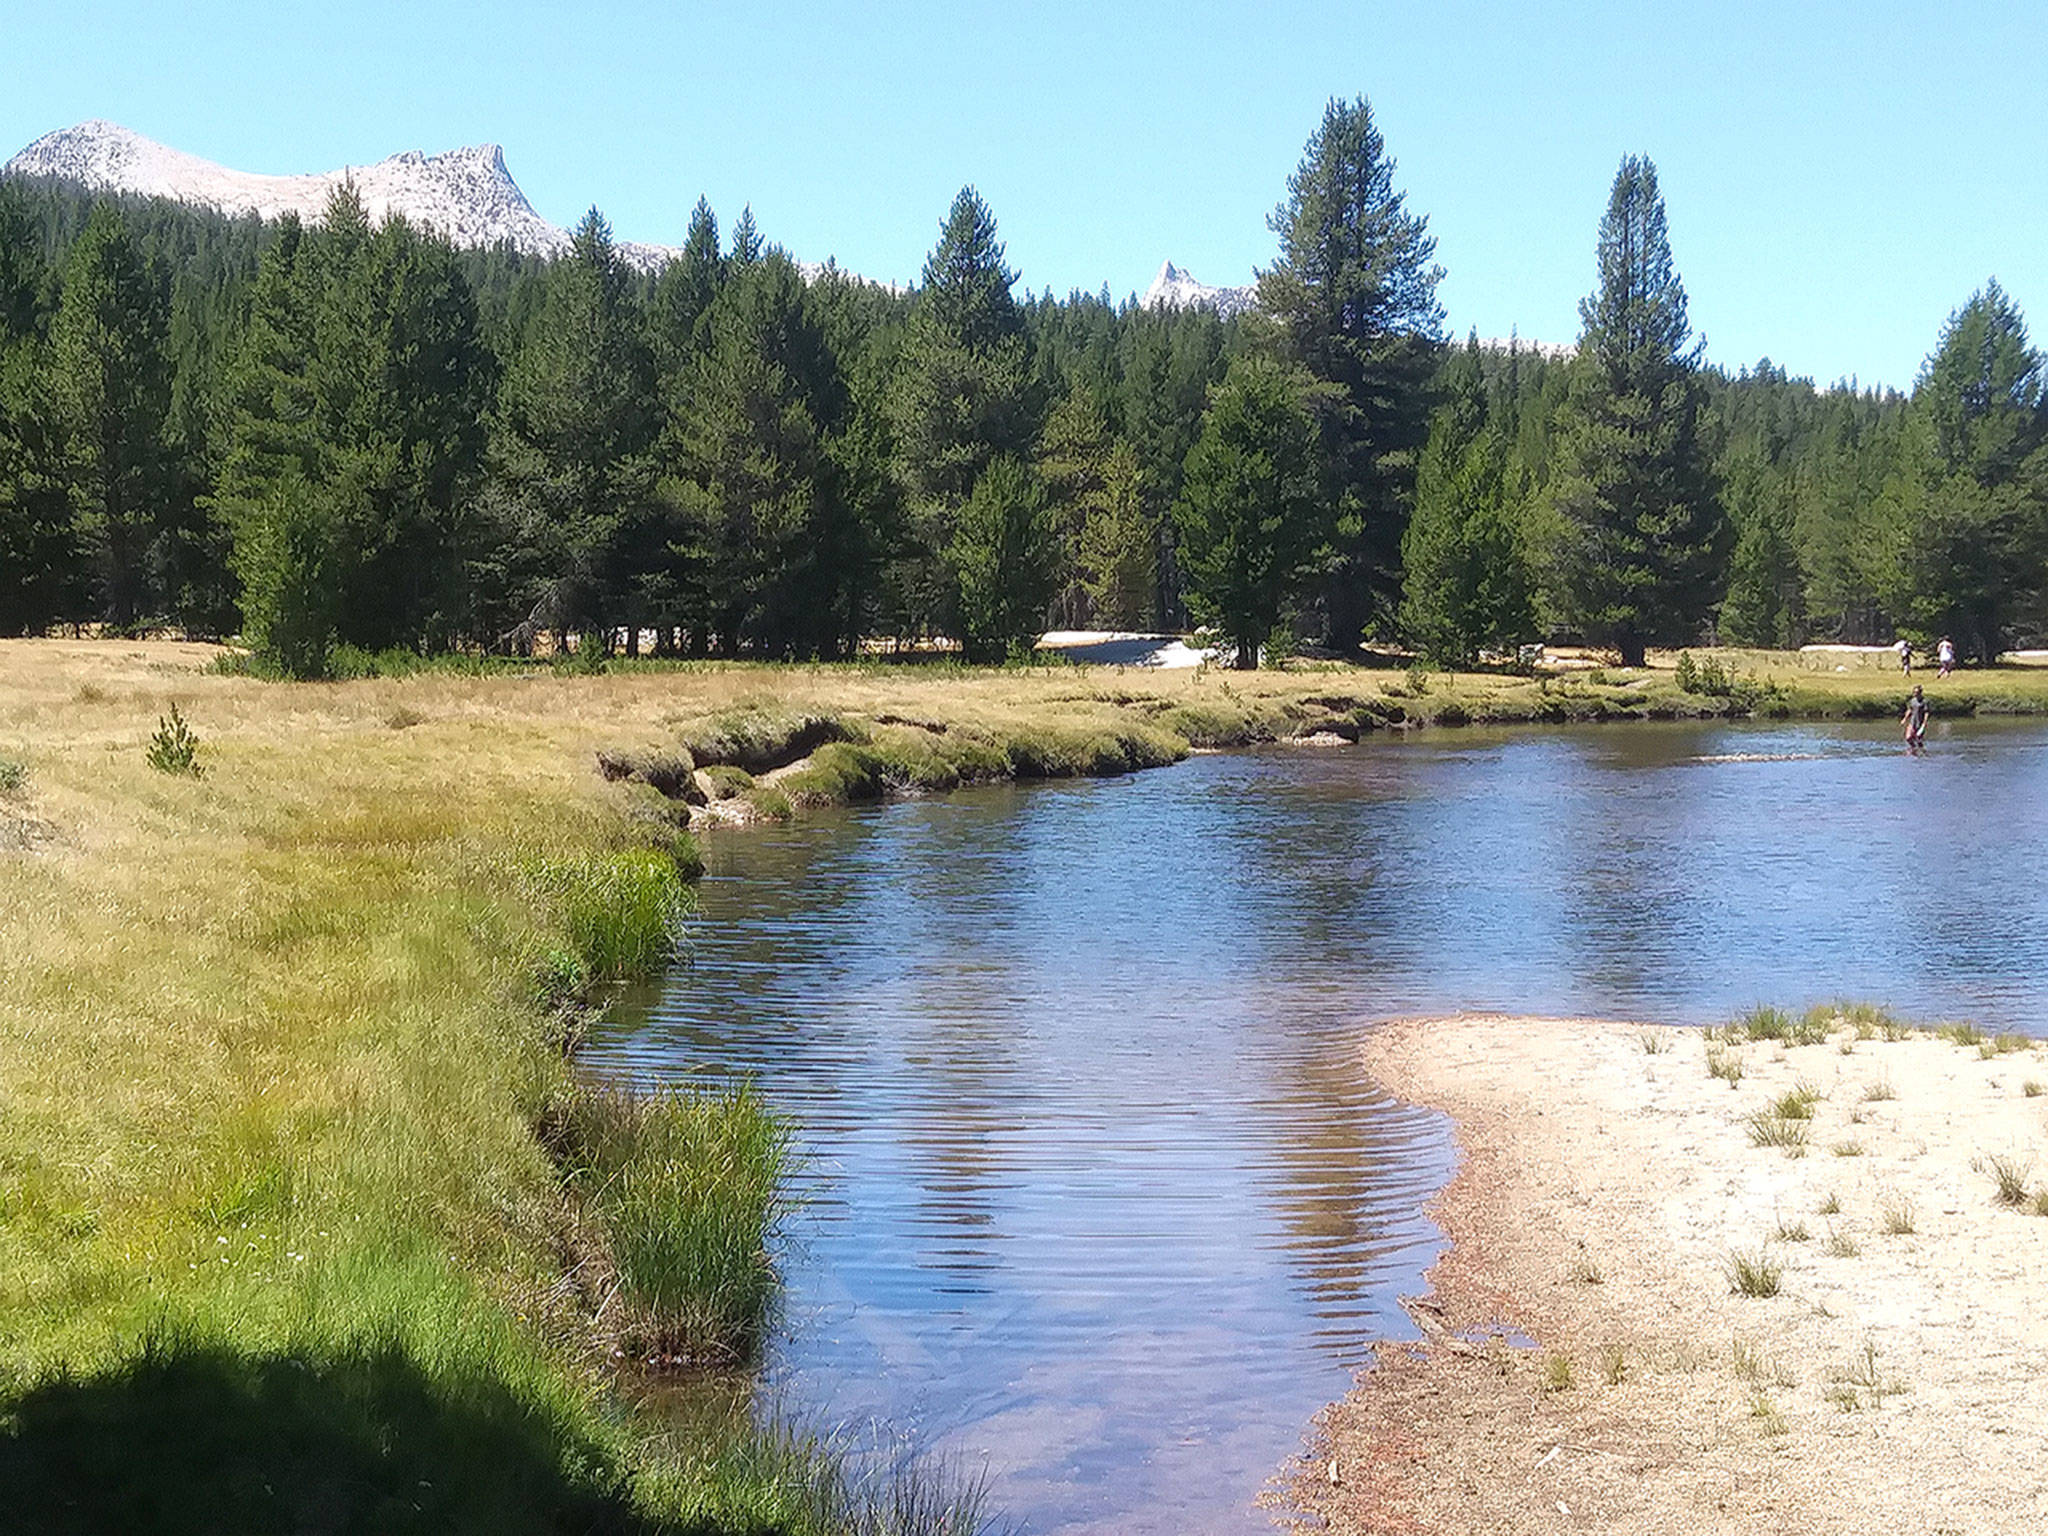 My picnic spot along the headwaters of the Tuolumne River in Yosemite National Park. At left is Unicorn Peak and at right, in the distance, is Cathedral Peak. Back in my youth, I sat atop both those granite spires on the same summer afternoon. (Photos by David Haerle/The Daily World)